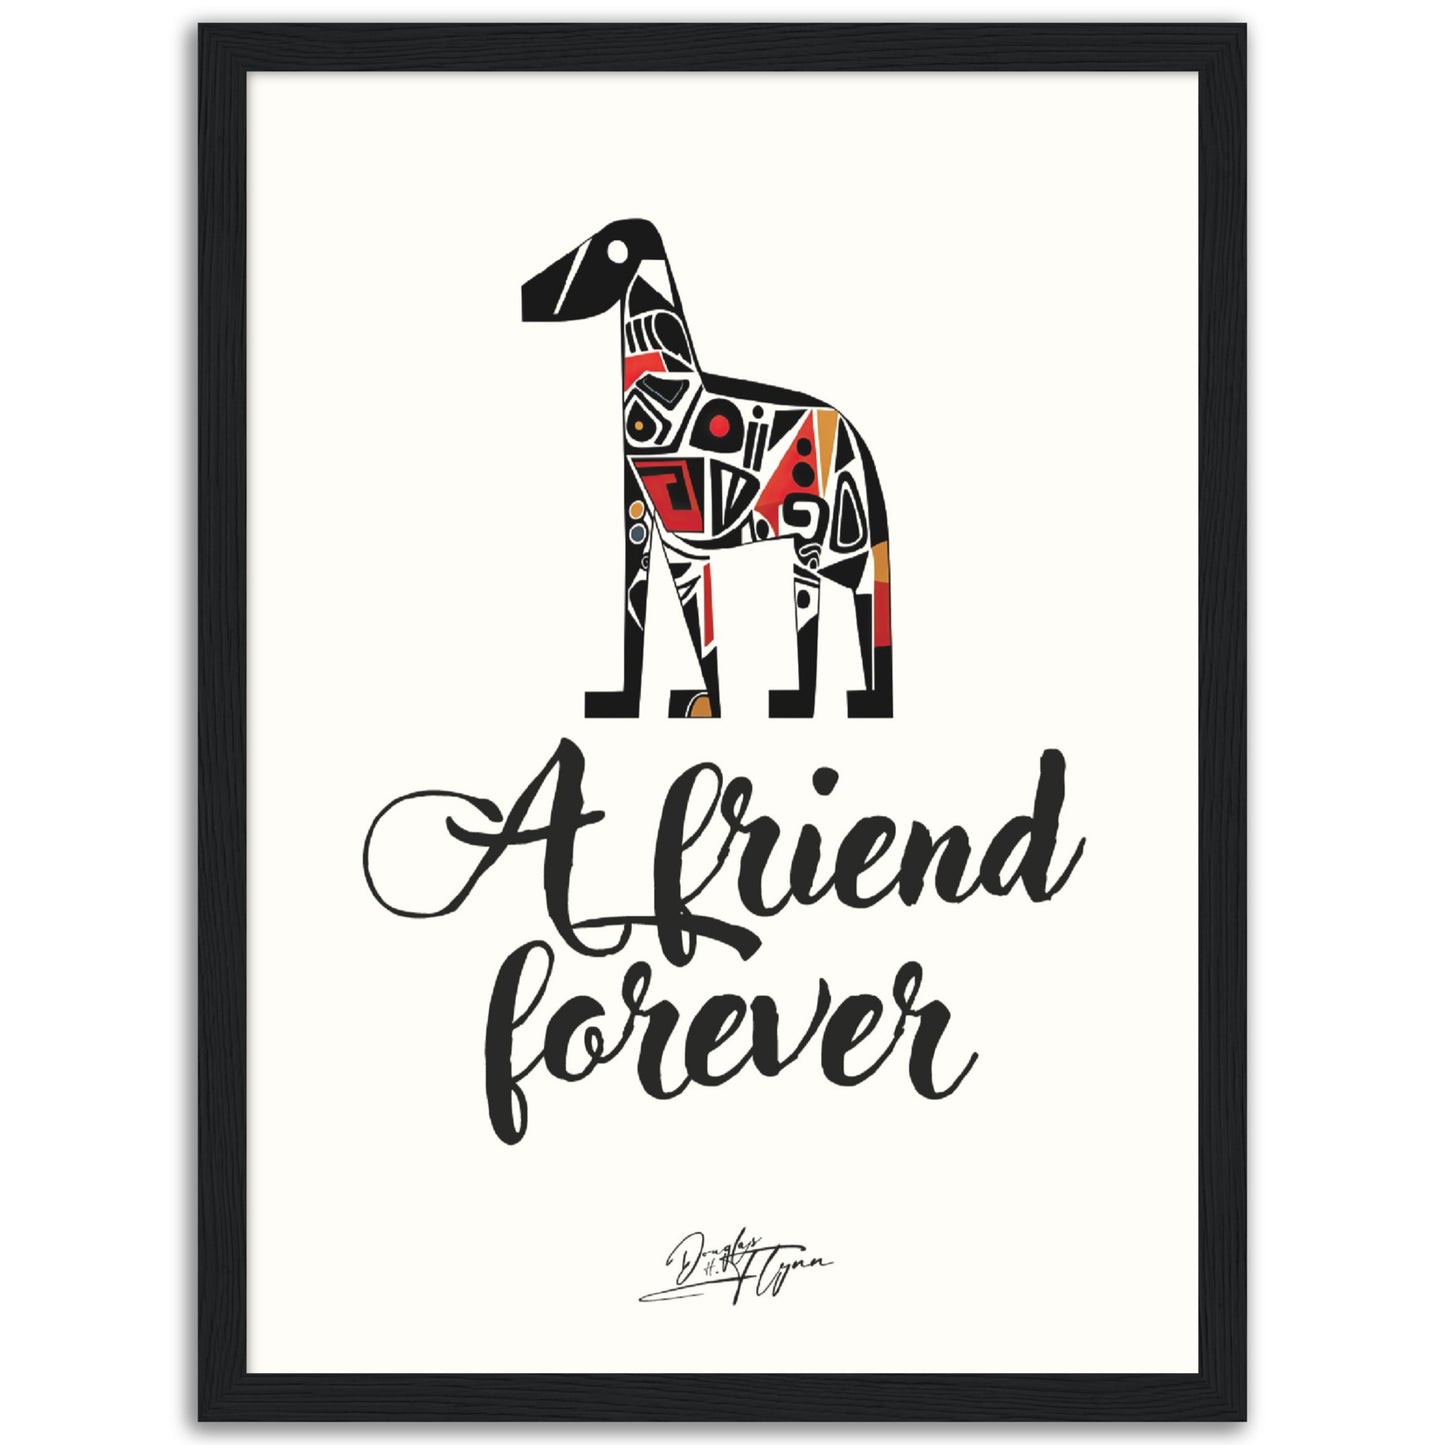 »A friend forever«